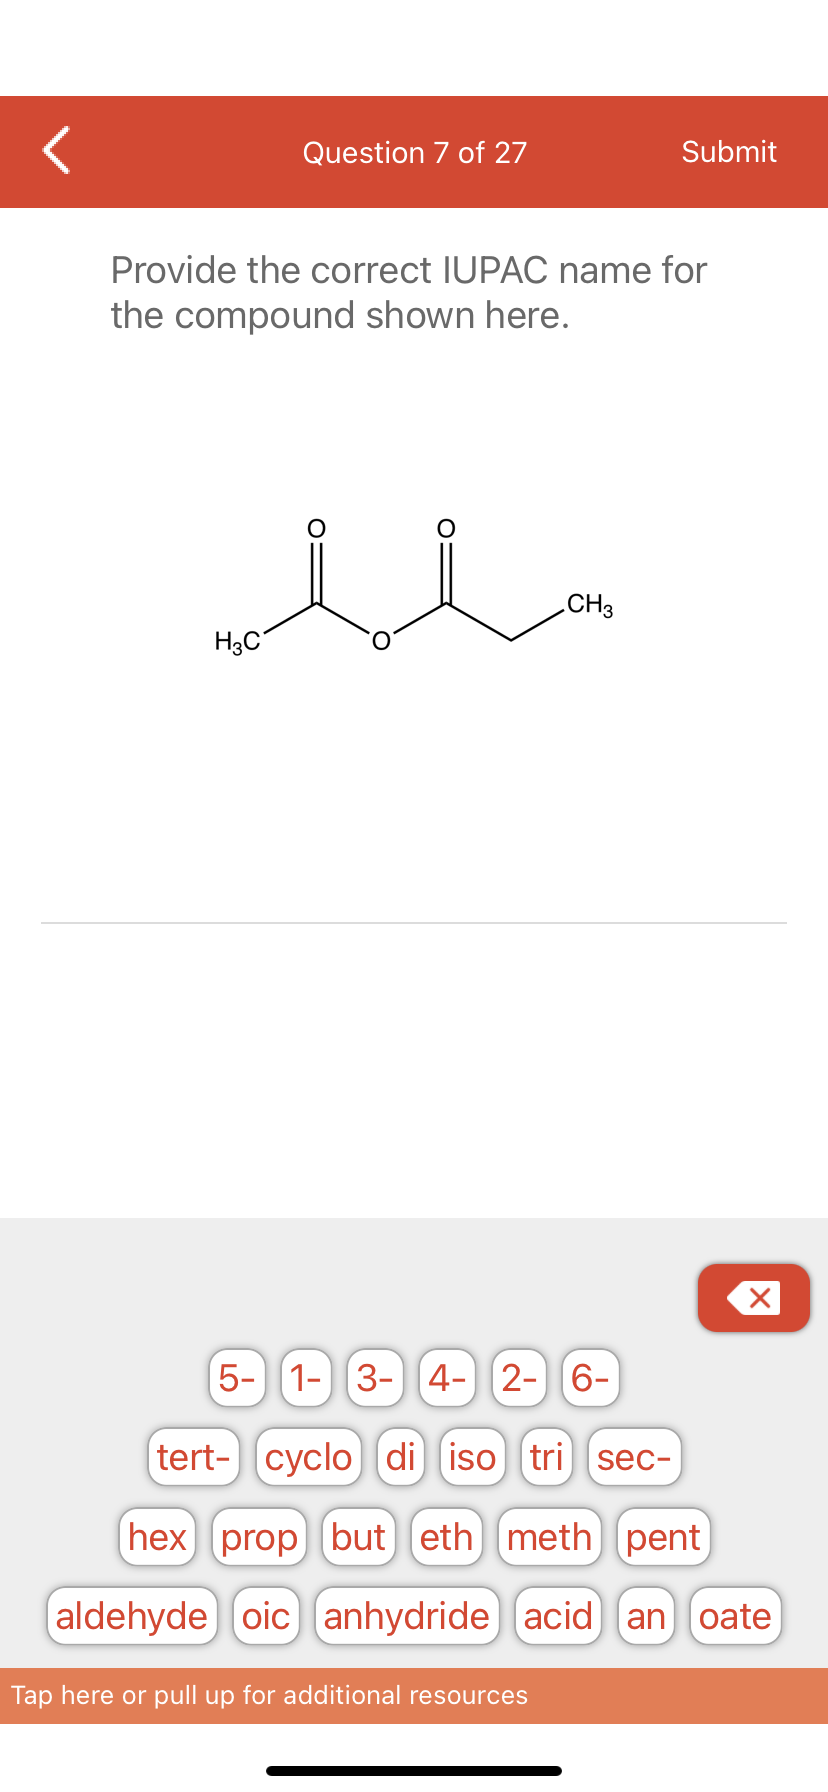 Question 7 of 27
Provide the correct IUPAC name for
the compound shown here.
u
H3C
Submit
CH3
Tap here or pull up for additional resources
X
5- 1- 3- 4- 2- 6-
tert- cyclo di iso tri sec-
(hex) prop but) eth meth) pent
(aldehyde) oic anhydride (acid) an oate